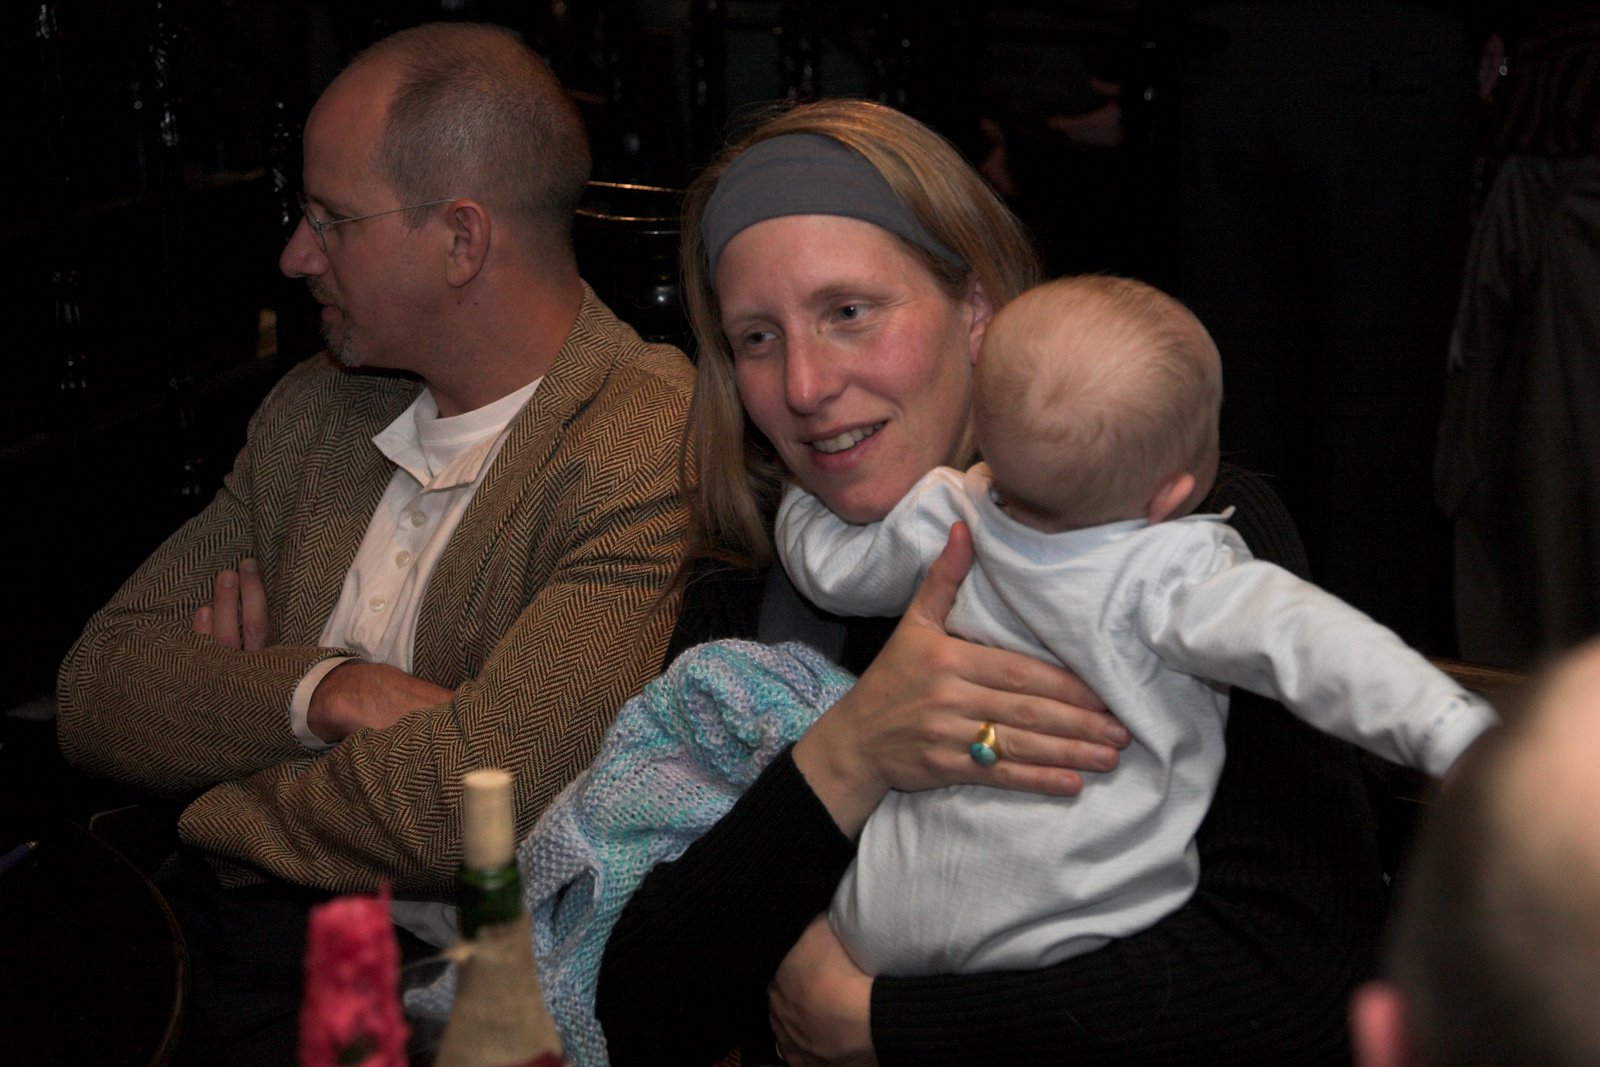 Nina Smith with baby, Will Foote in background